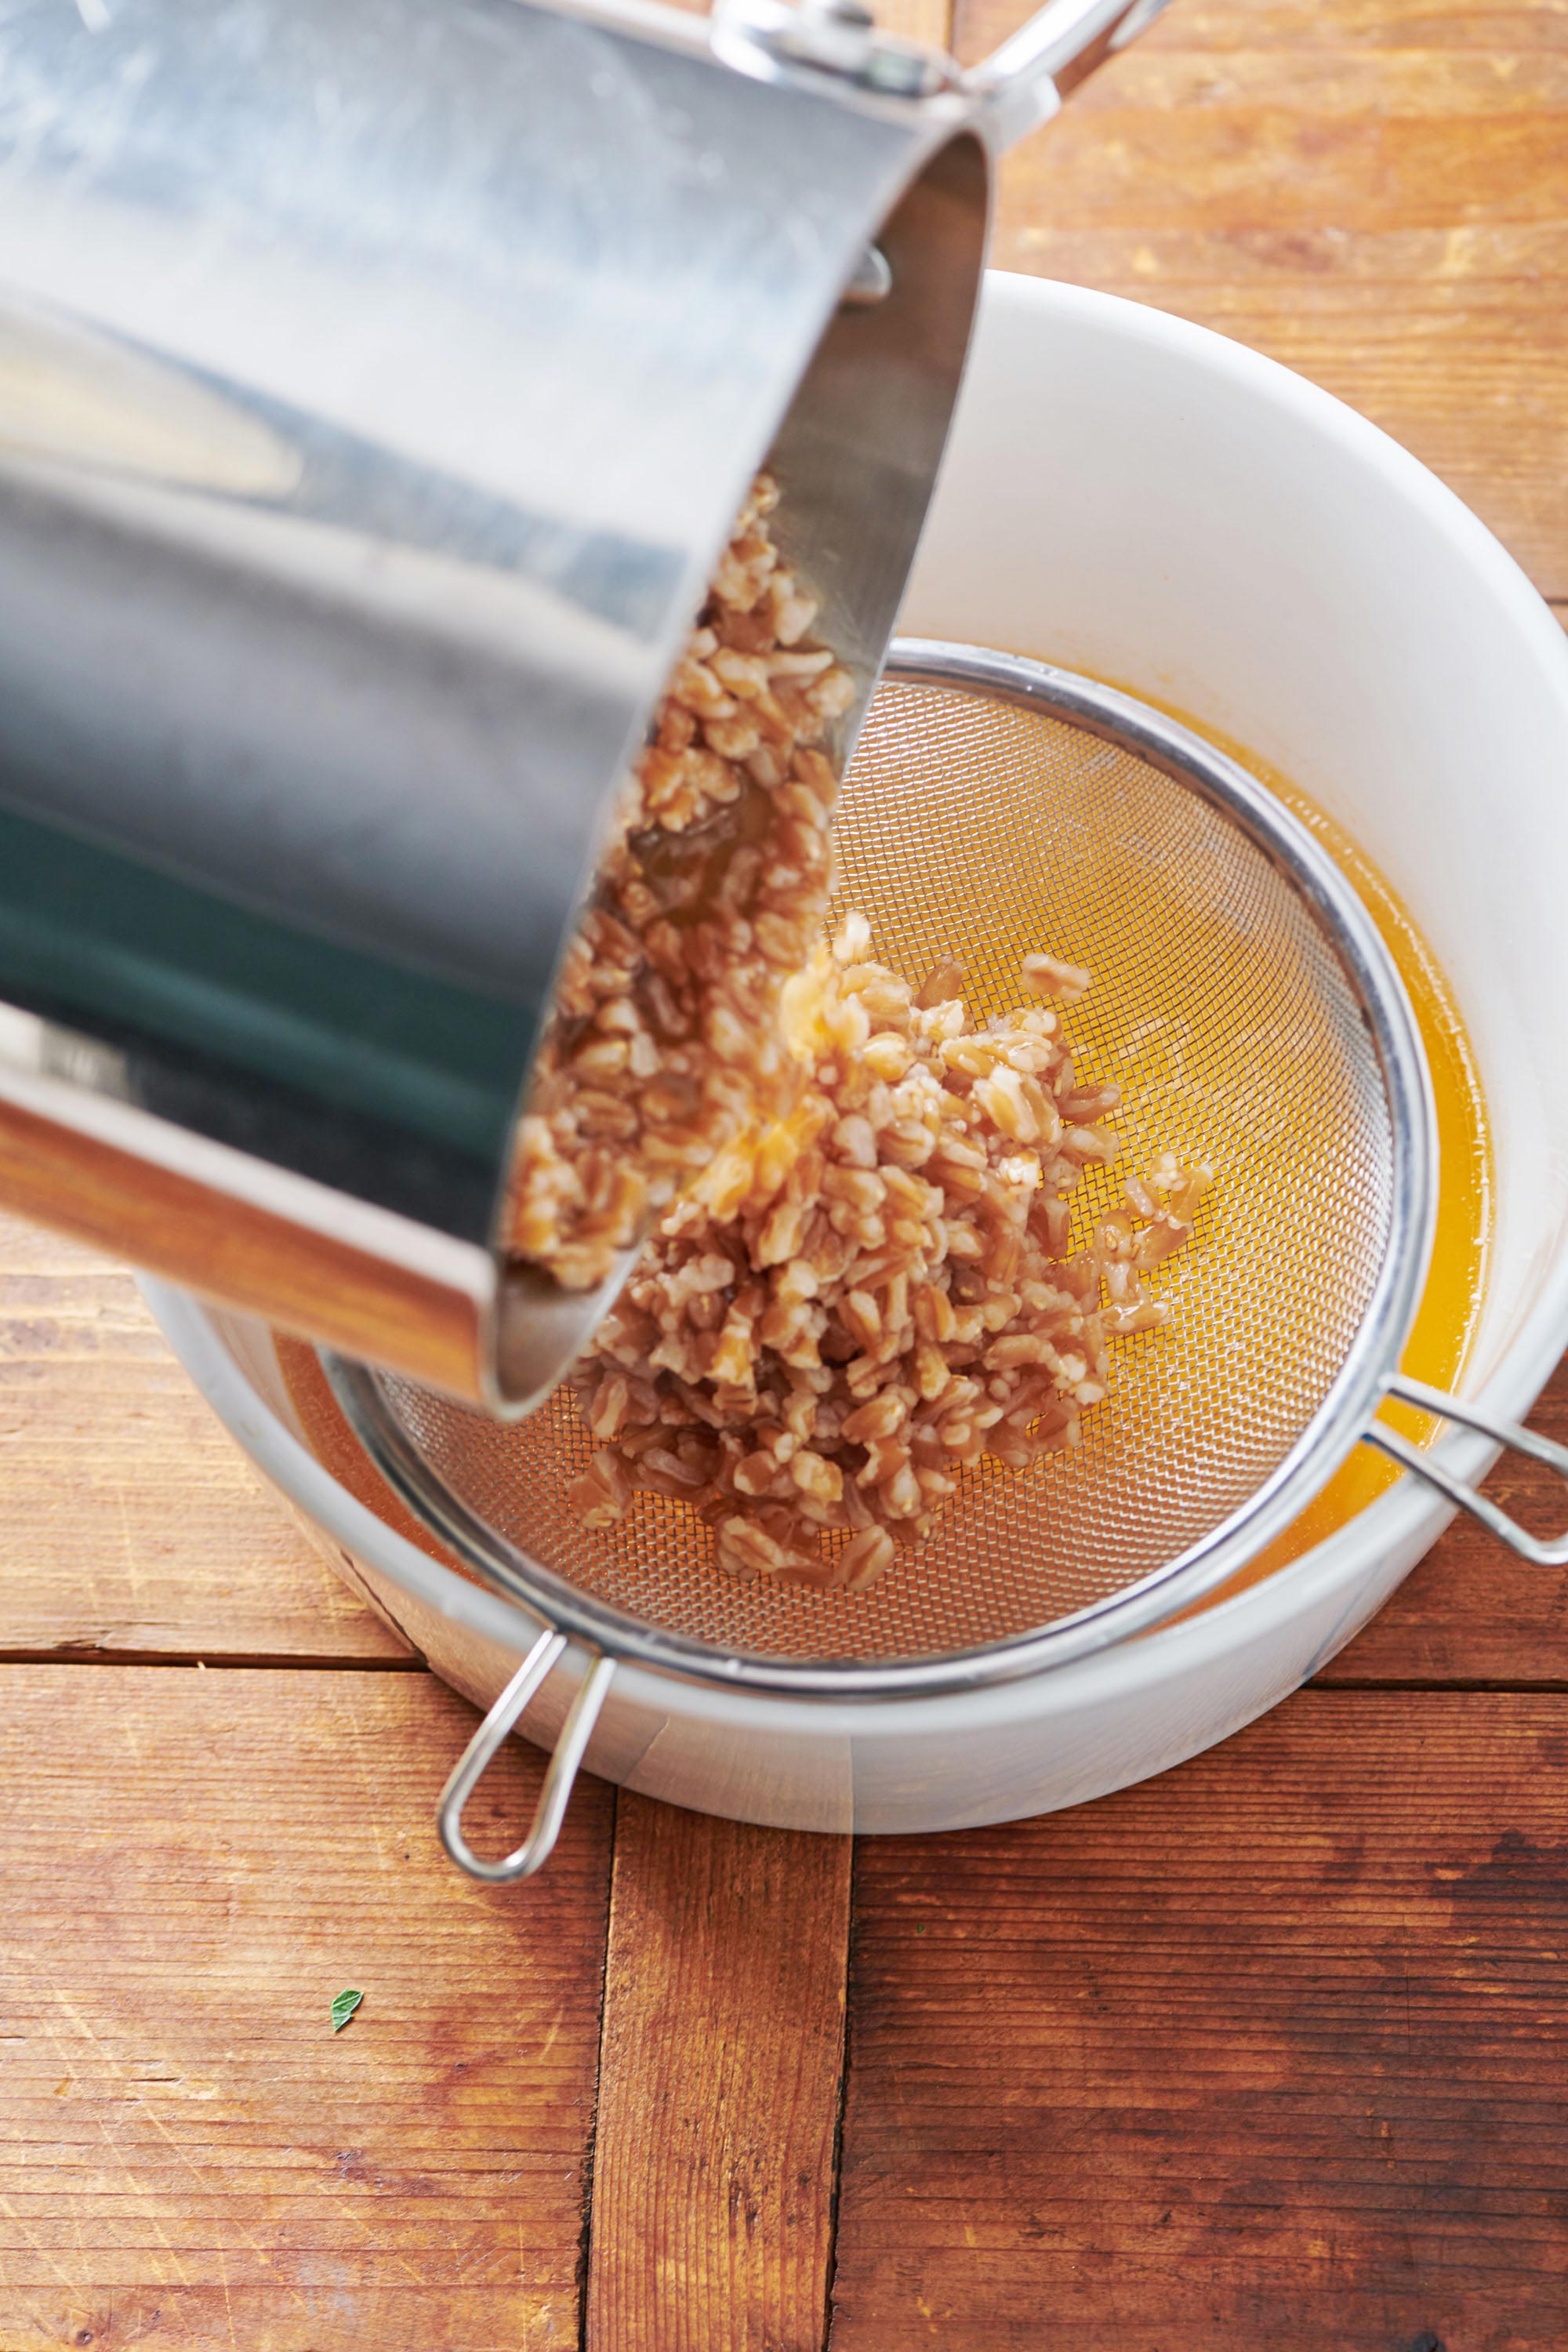 Cooked farro being drained in a sieve.